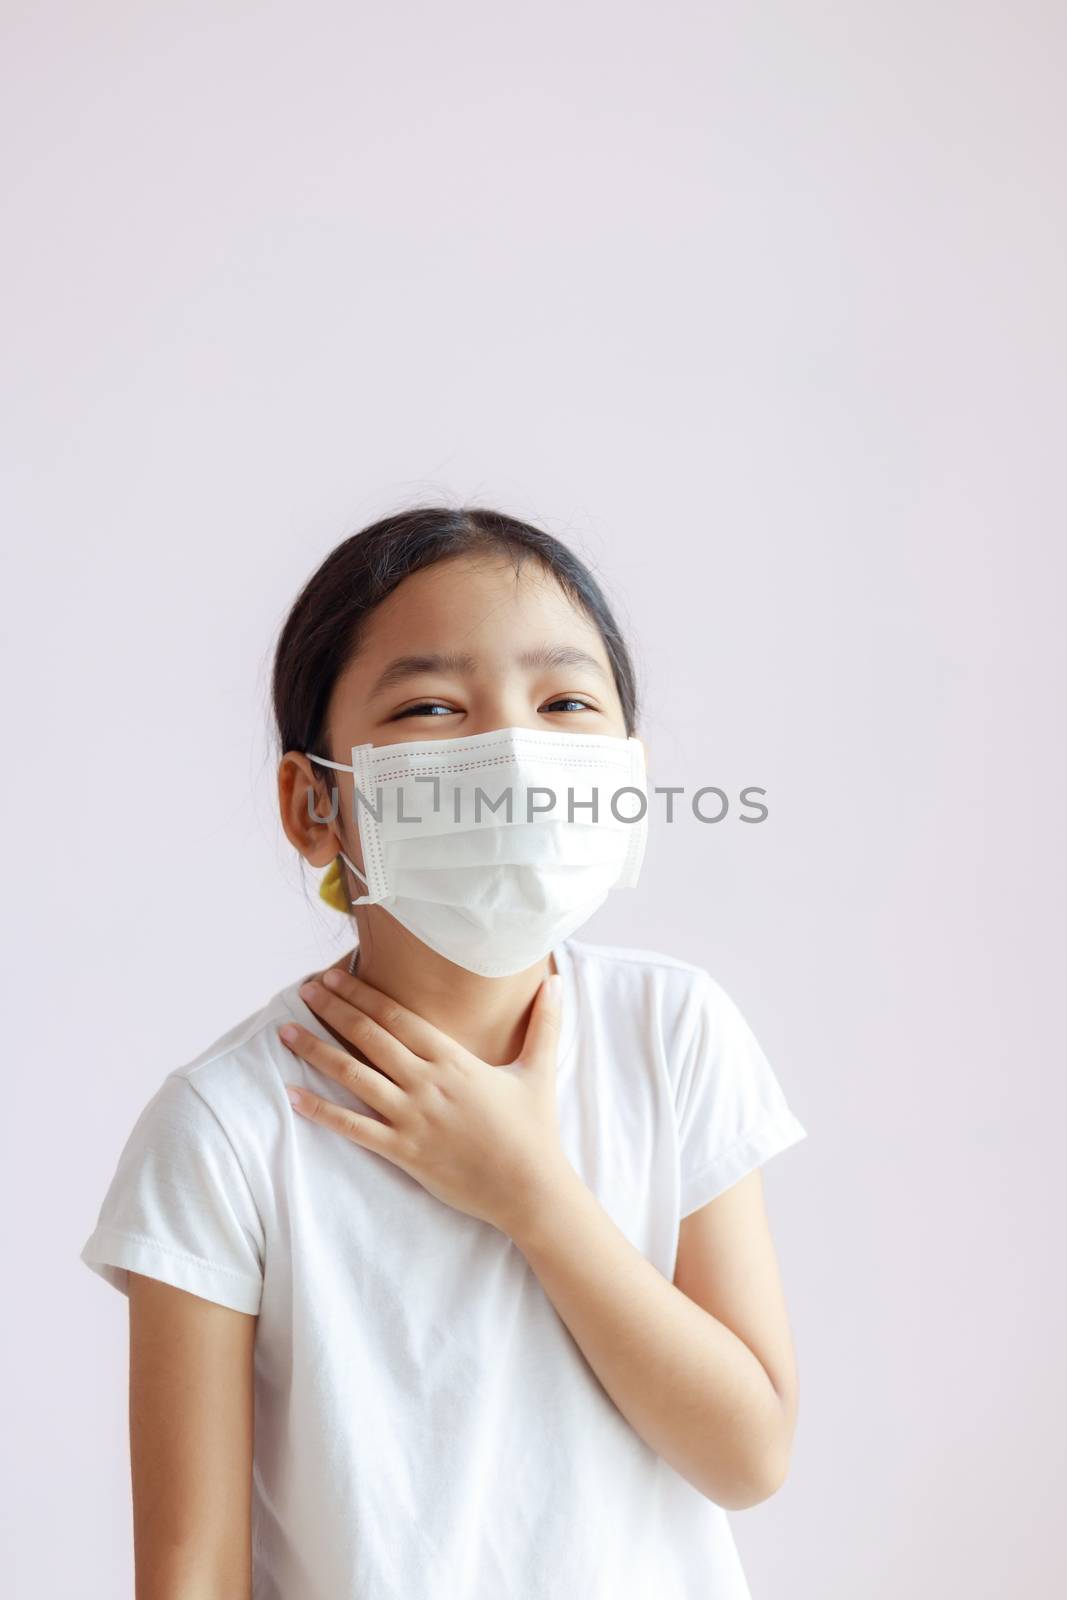 The kid wear a protective medical mask by Nikkikii